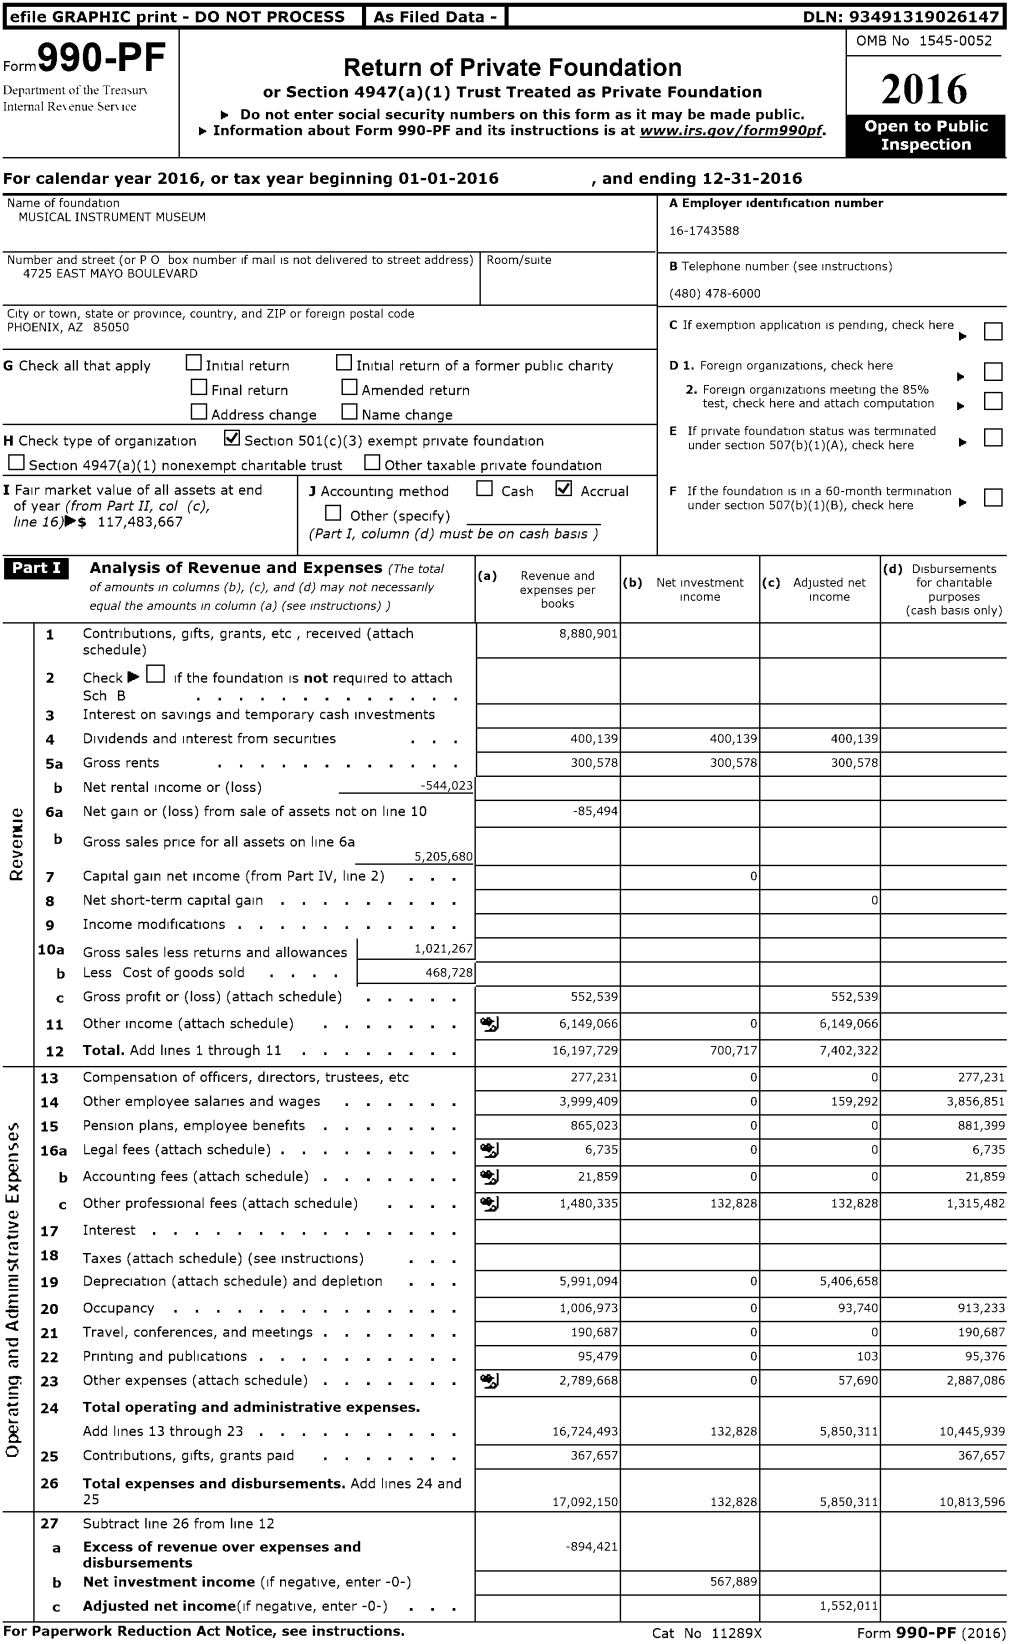 2016 Internal Rey Erne Ser Ice ► Do Not Enter Social Security Numbers on This Form As It May Be Made Public